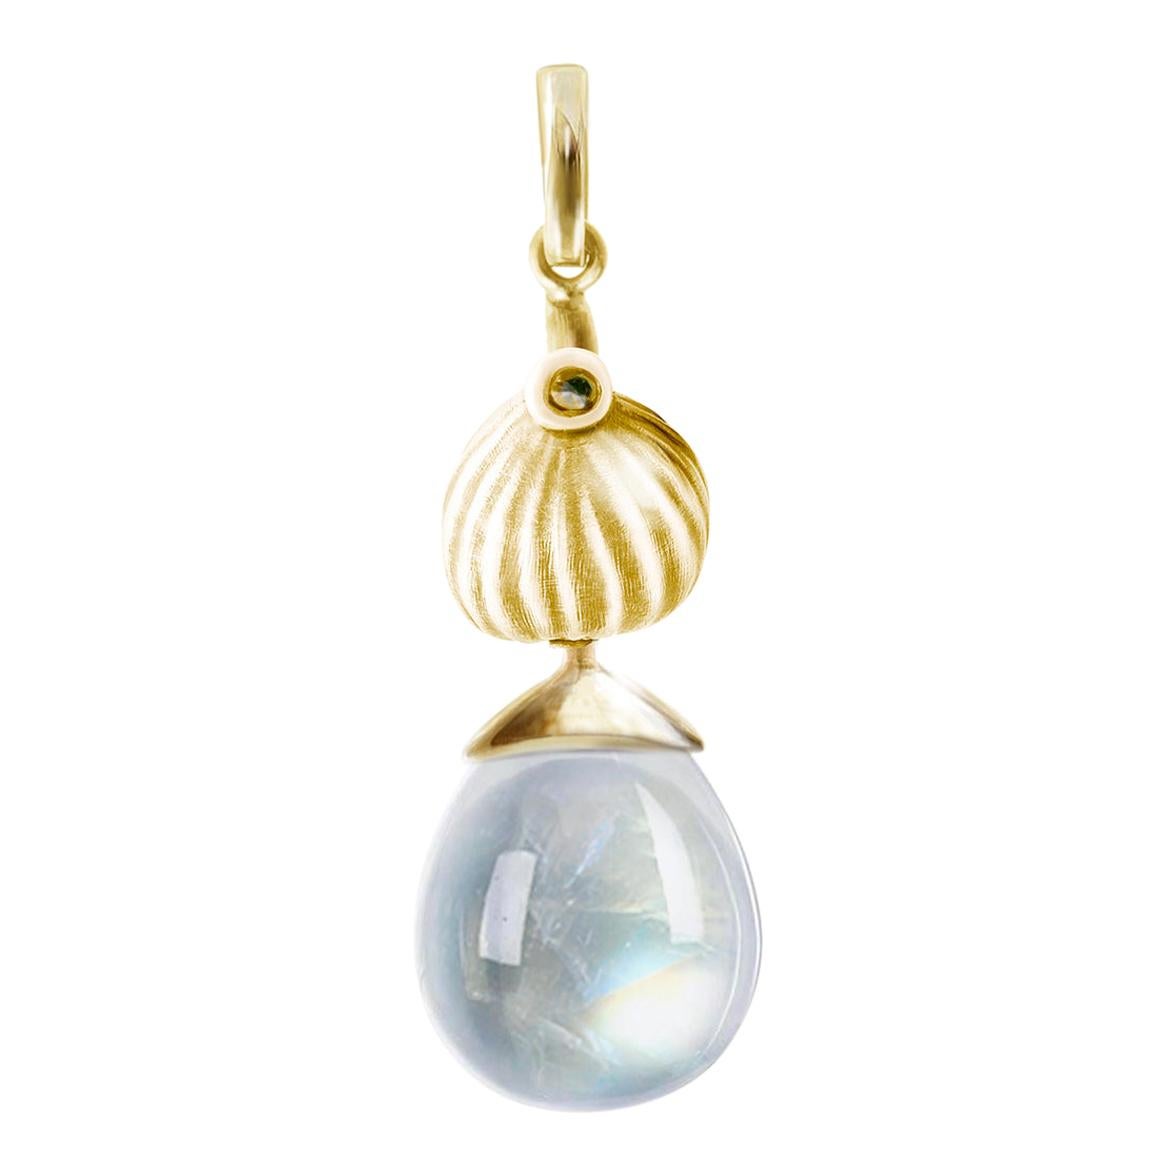 Yellow Gold Drop Pendant Necklace with Aquamarine by the Artist For ...